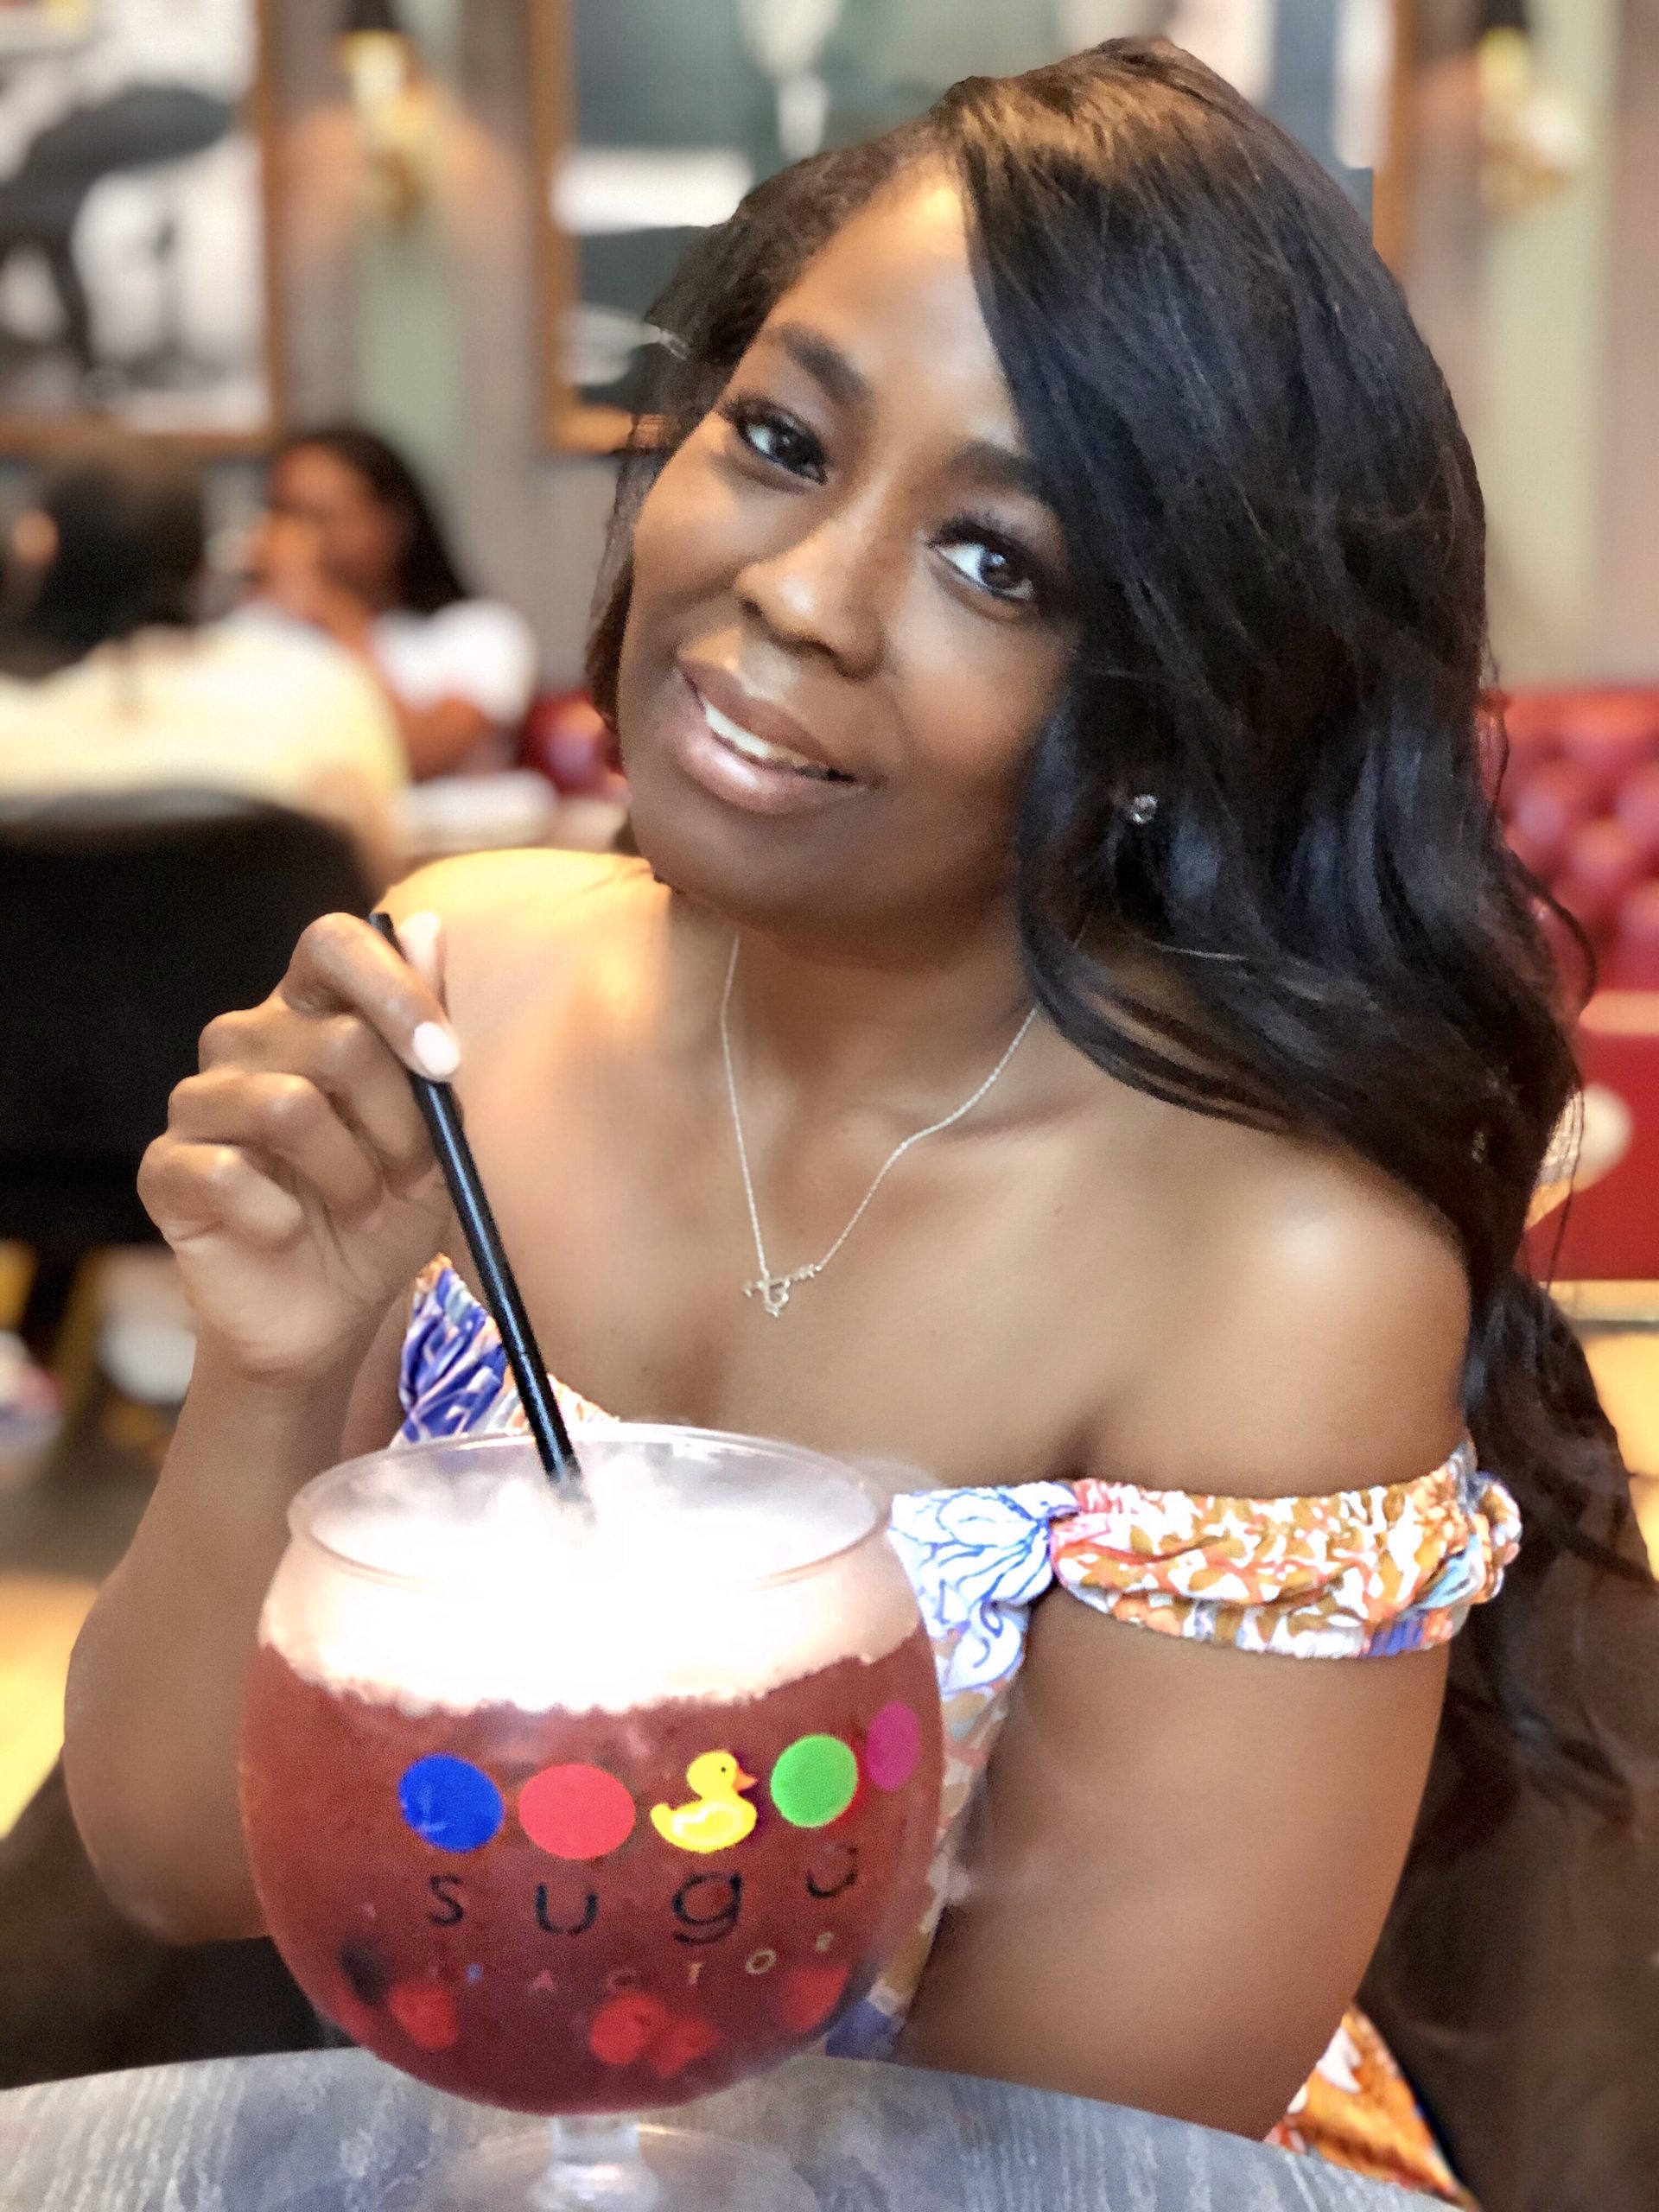 Date Night Turns Into Impromptu Belated Birthday Celebration At The Sugar Factory ATL!